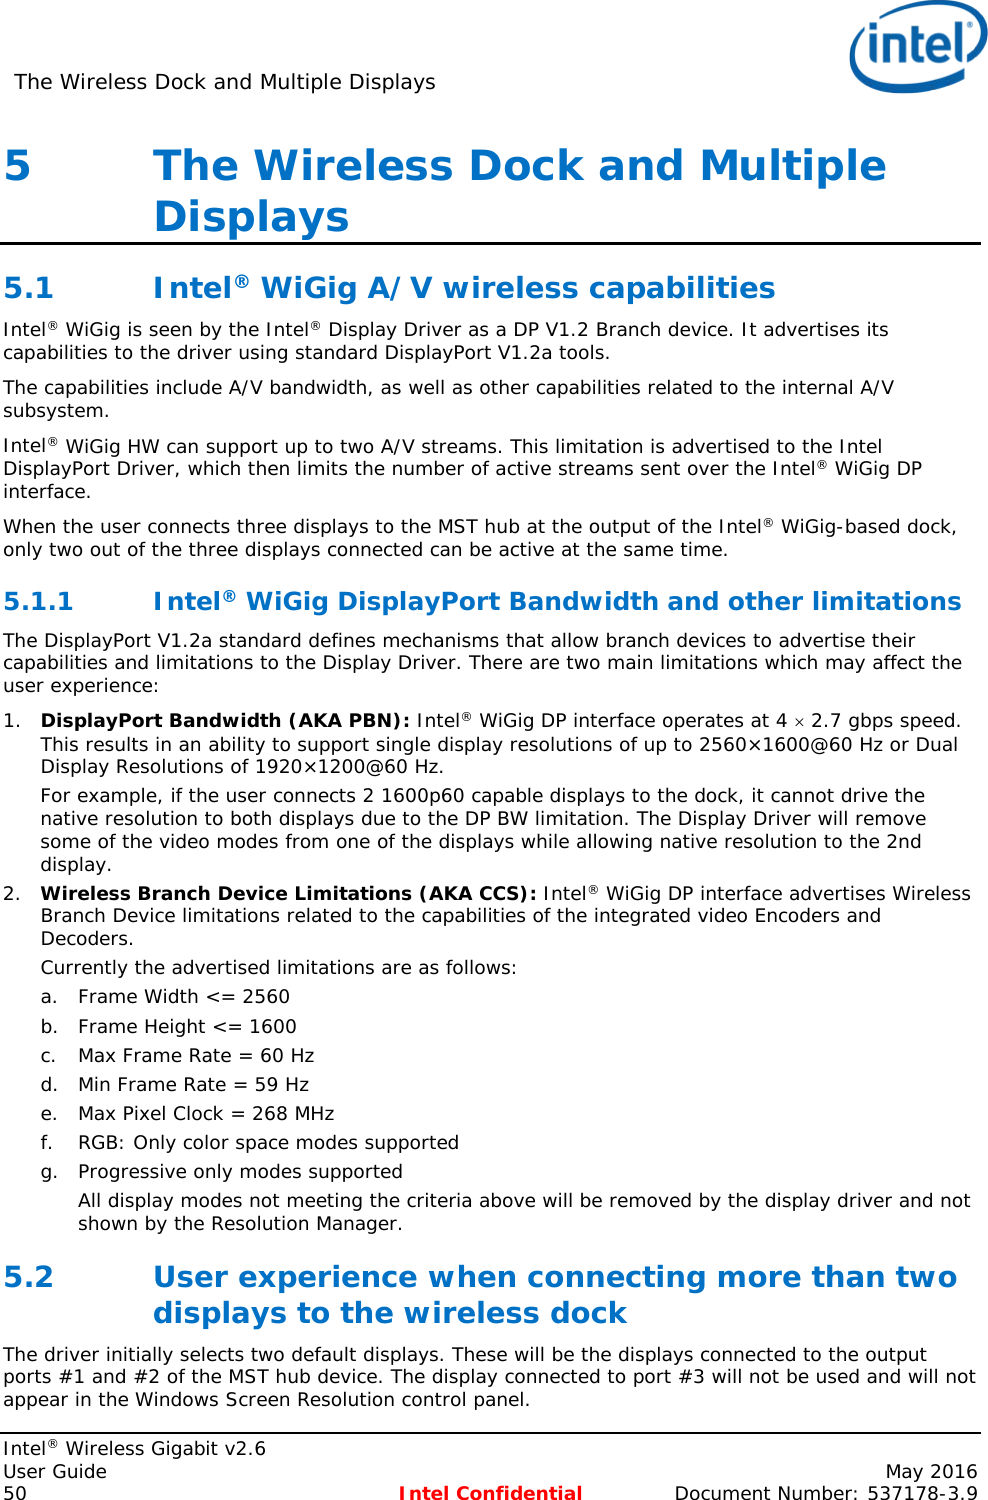 The Wireless Dock and Multiple Displays    Intel® Wireless Gigabit v2.6 User Guide    May 2016 50 Intel Confidential Document Number: 537178-3.9 5   The Wireless Dock and Multiple Displays 5.1 Intel® WiGig A/V wireless capabilities Intel® WiGig is seen by the Intel® Display Driver as a DP V1.2 Branch device. It advertises its capabilities to the driver using standard DisplayPort V1.2a tools. The capabilities include A/V bandwidth, as well as other capabilities related to the internal A/V subsystem. Intel® WiGig HW can support up to two A/V streams. This limitation is advertised to the Intel DisplayPort Driver, which then limits the number of active streams sent over the Intel® WiGig DP interface. When the user connects three displays to the MST hub at the output of the Intel® WiGig-based dock, only two out of the three displays connected can be active at the same time. 5.1.1 Intel® WiGig DisplayPort Bandwidth and other limitations  The DisplayPort V1.2a standard defines mechanisms that allow branch devices to advertise their capabilities and limitations to the Display Driver. There are two main limitations which may affect the user experience: 1. DisplayPort Bandwidth (AKA PBN): Intel® WiGig DP interface operates at 4 × 2.7 gbps speed. This results in an ability to support single display resolutions of up to 2560×1600@60 Hz or Dual Display Resolutions of 1920×1200@60 Hz. For example, if the user connects 2 1600p60 capable displays to the dock, it cannot drive the native resolution to both displays due to the DP BW limitation. The Display Driver will remove some of the video modes from one of the displays while allowing native resolution to the 2nd display. 2. Wireless Branch Device Limitations (AKA CCS): Intel® WiGig DP interface advertises Wireless Branch Device limitations related to the capabilities of the integrated video Encoders and Decoders. Currently the advertised limitations are as follows: a. Frame Width &lt;= 2560 b. Frame Height &lt;= 1600 c. Max Frame Rate = 60 Hz d. Min Frame Rate = 59 Hz e. Max Pixel Clock = 268 MHz f. RGB: Only color space modes supported g. Progressive only modes supported All display modes not meeting the criteria above will be removed by the display driver and not shown by the Resolution Manager. 5.2 User experience when connecting more than two displays to the wireless dock The driver initially selects two default displays. These will be the displays connected to the output ports #1 and #2 of the MST hub device. The display connected to port #3 will not be used and will not appear in the Windows Screen Resolution control panel. 